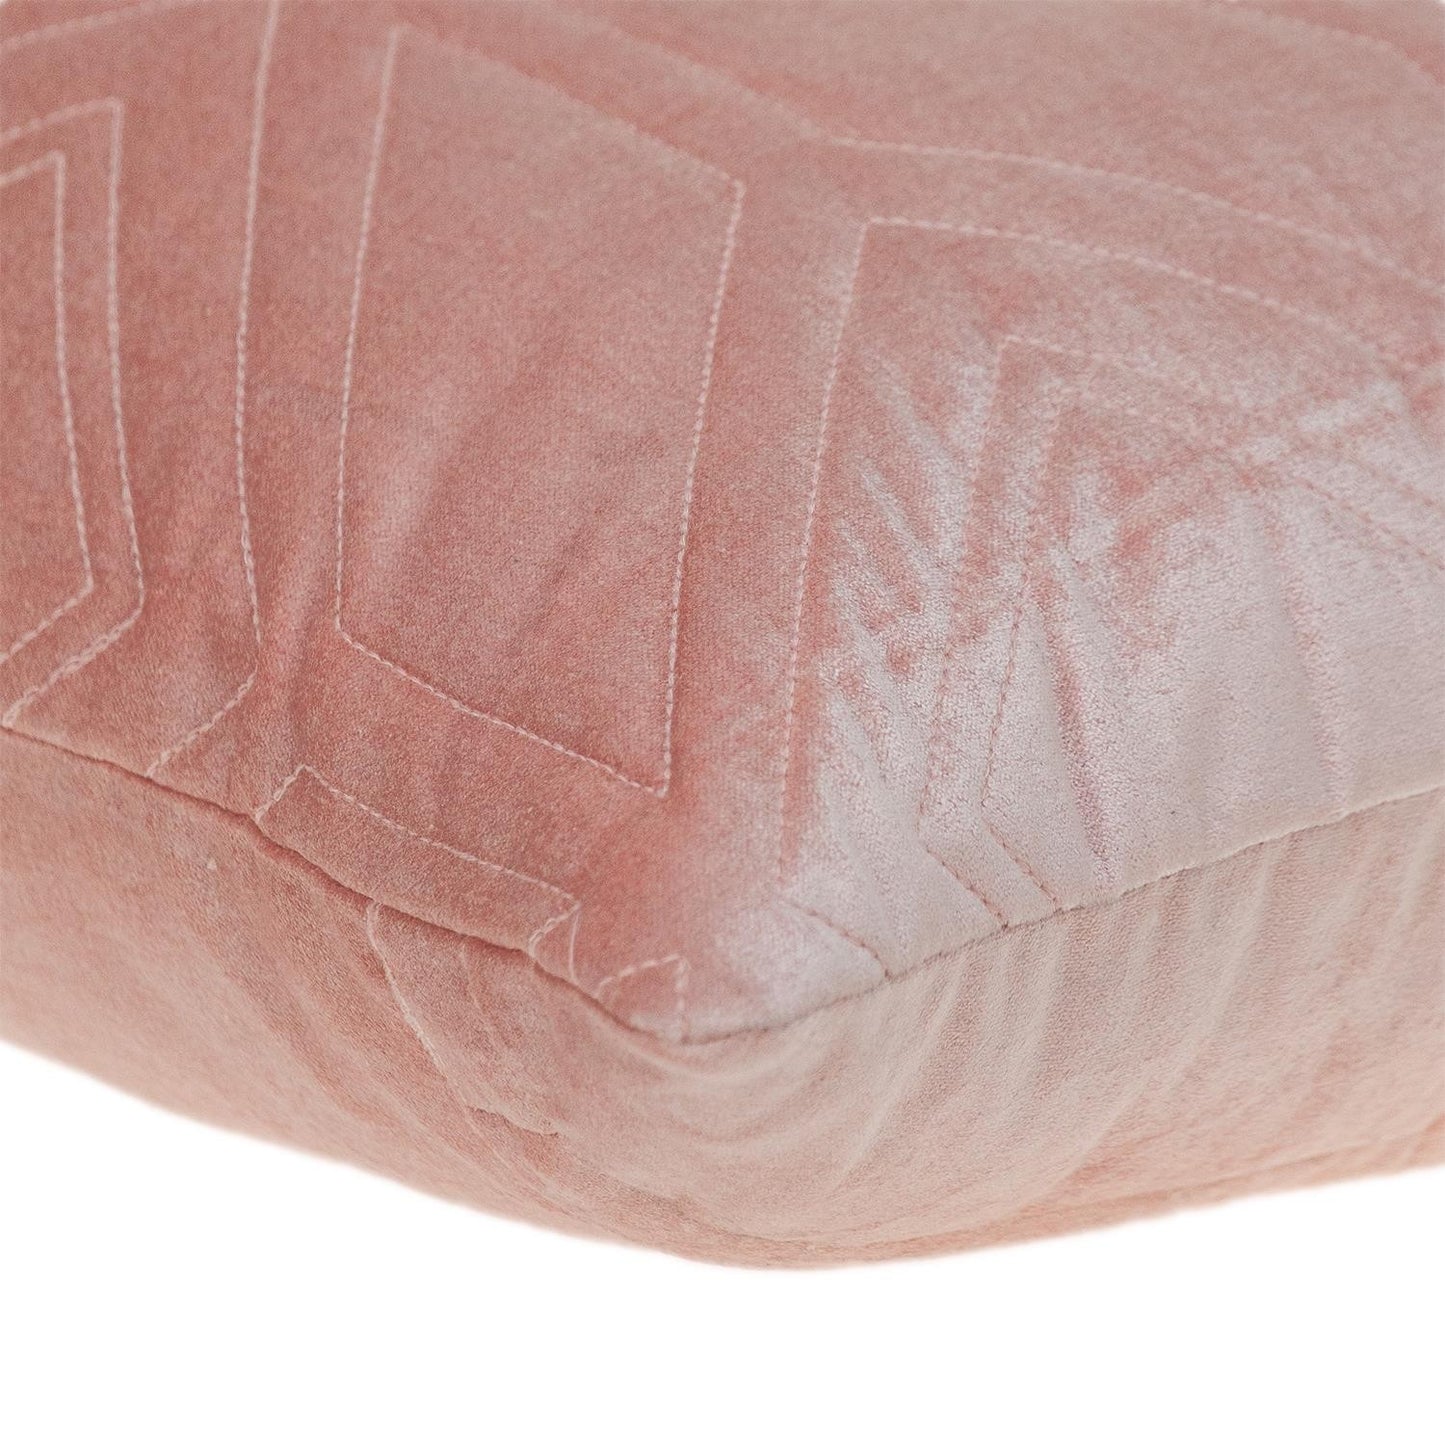 Pink Quilted Diamonds Velvet Solid Color Throw Pillow